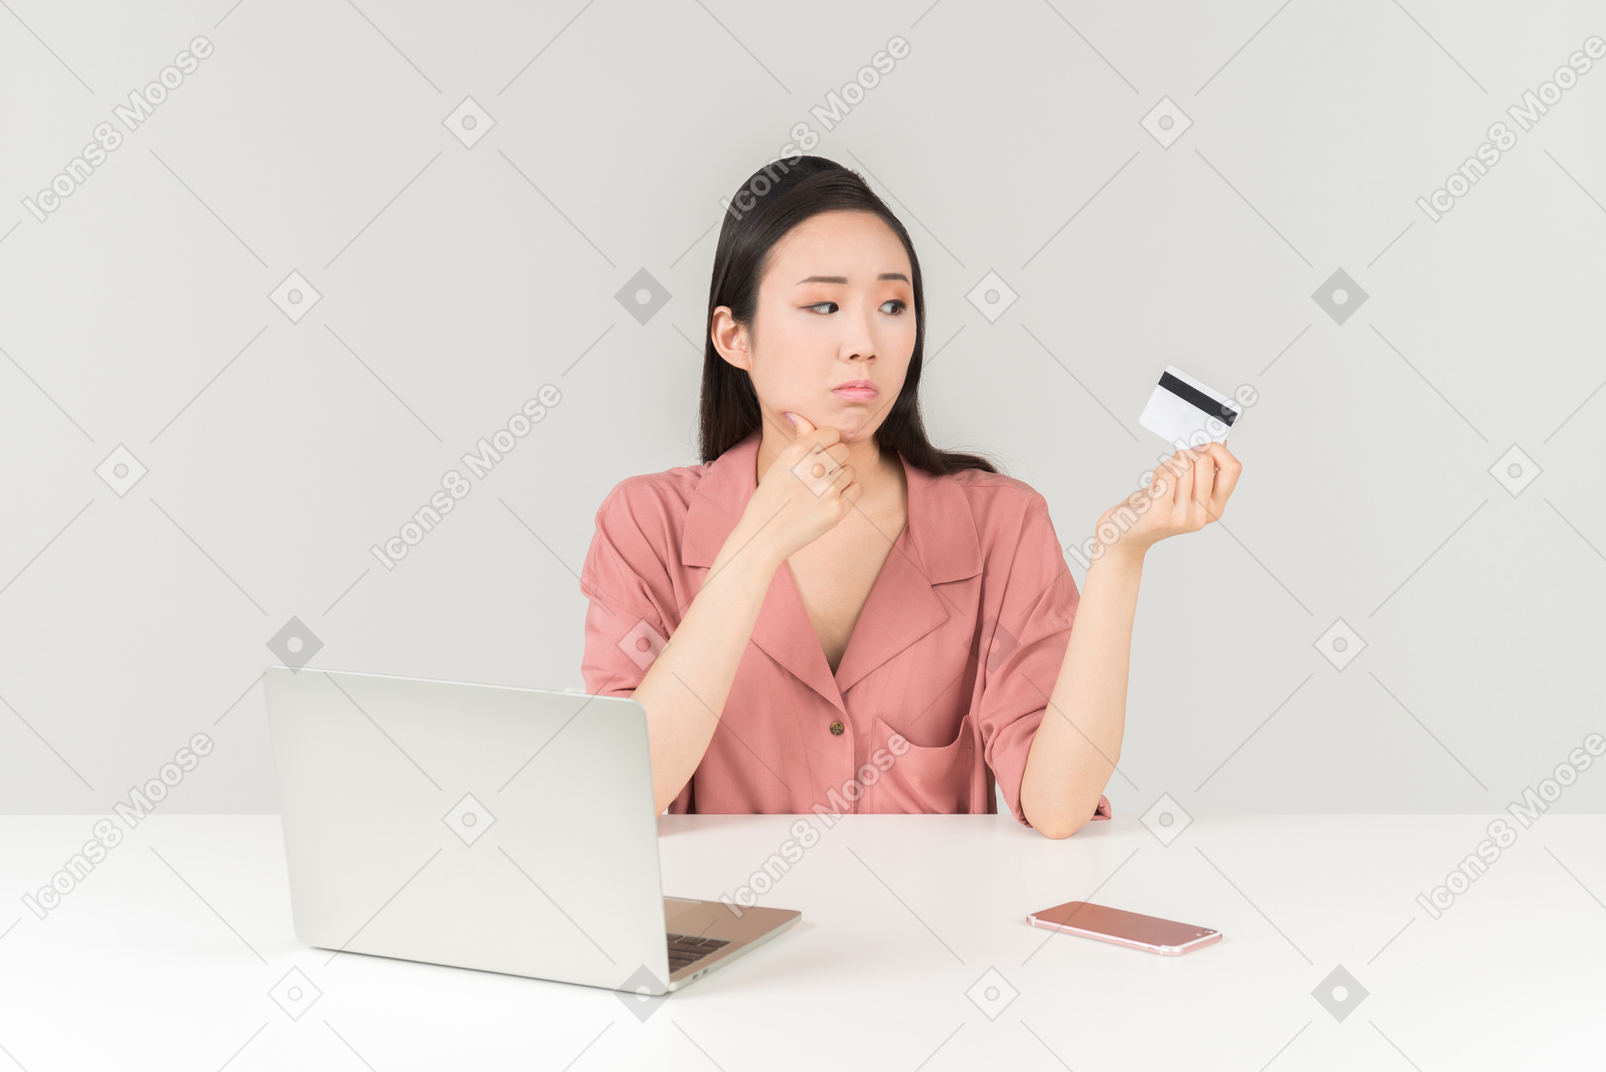 Sad looking young asian woman doing online shopping